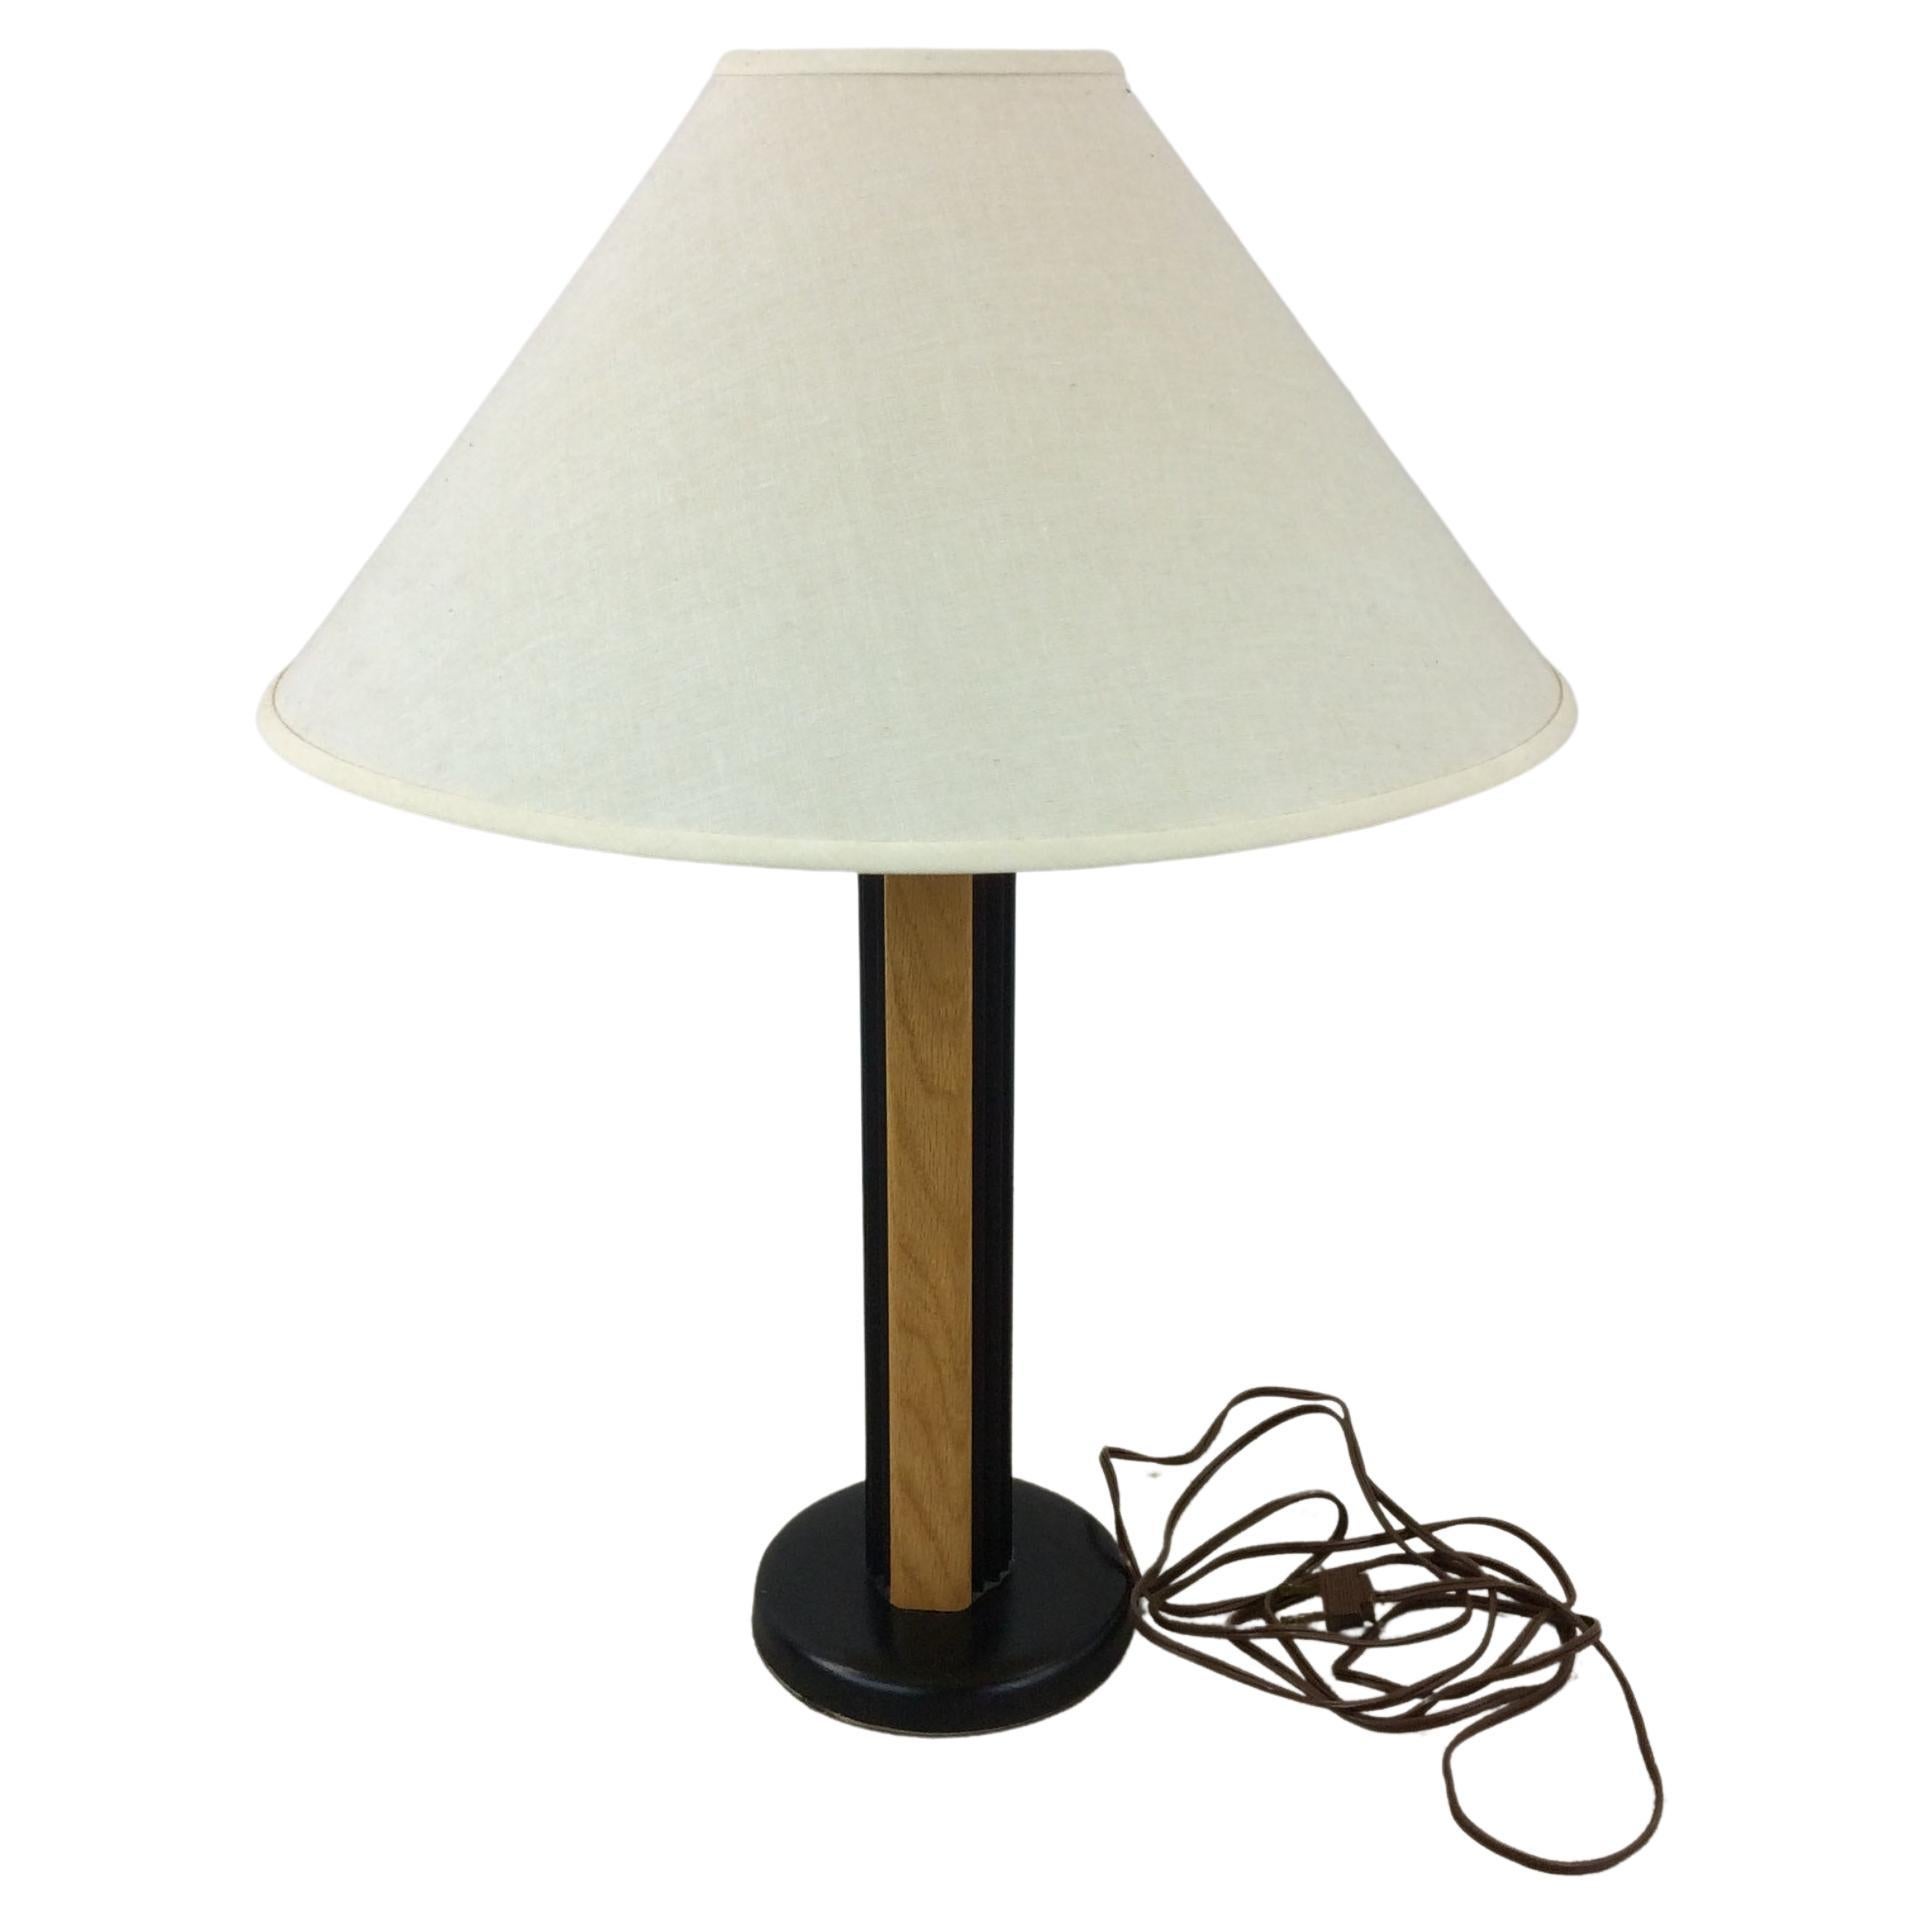 Vintage Postmodern Table Lamp Black with Teak Wood Accent & Empire Shade For Sale